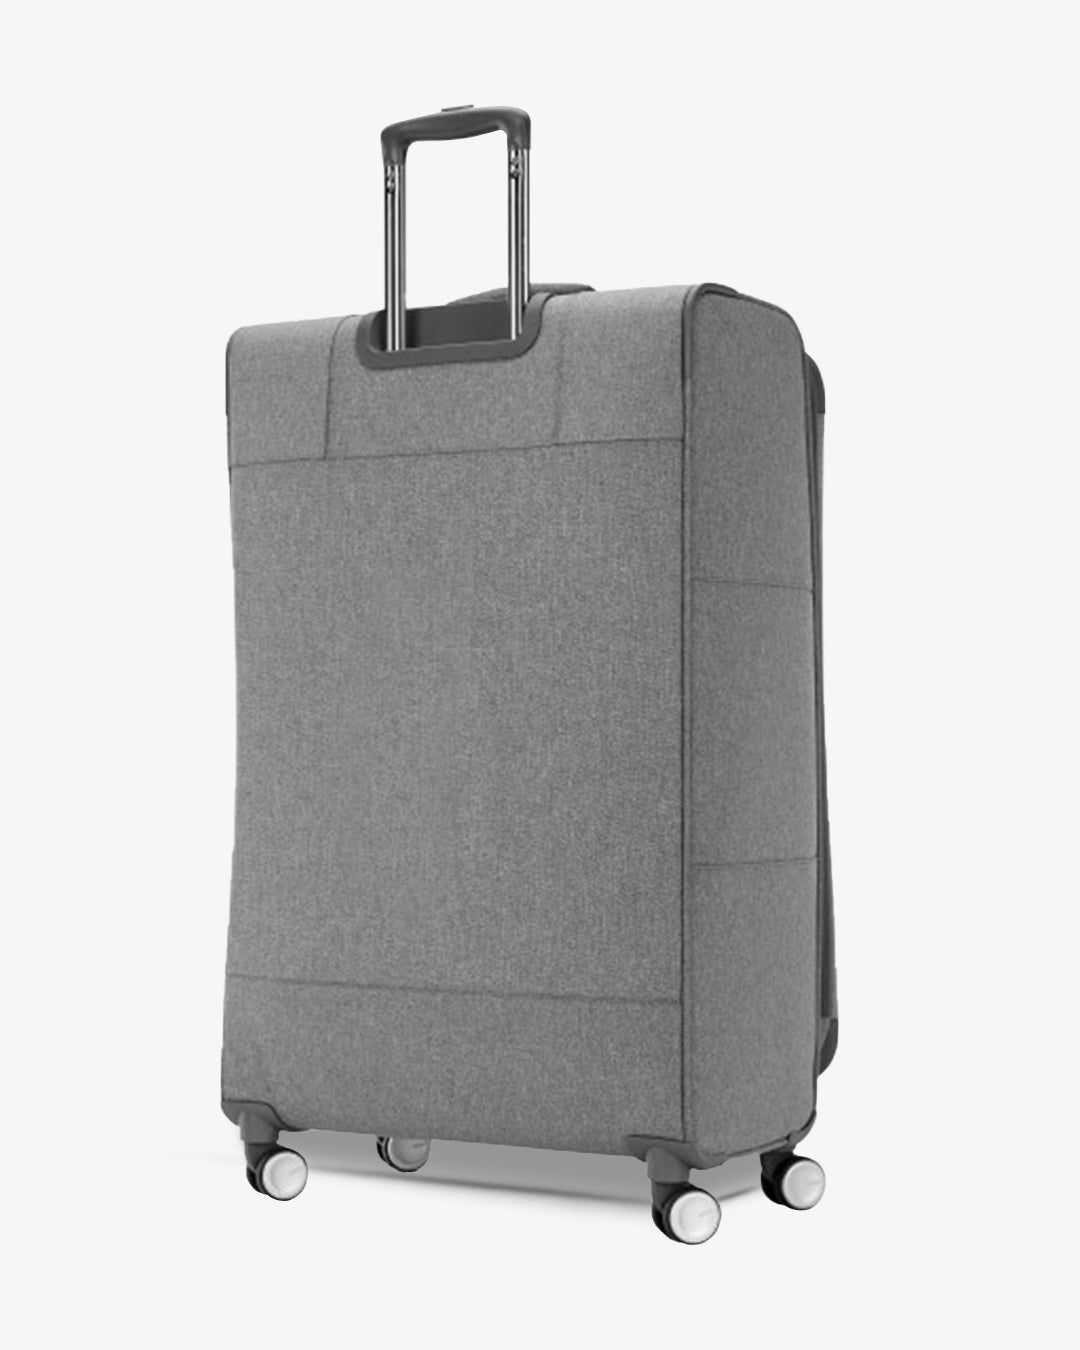 American Tourister Whim Luggage (LARGE)